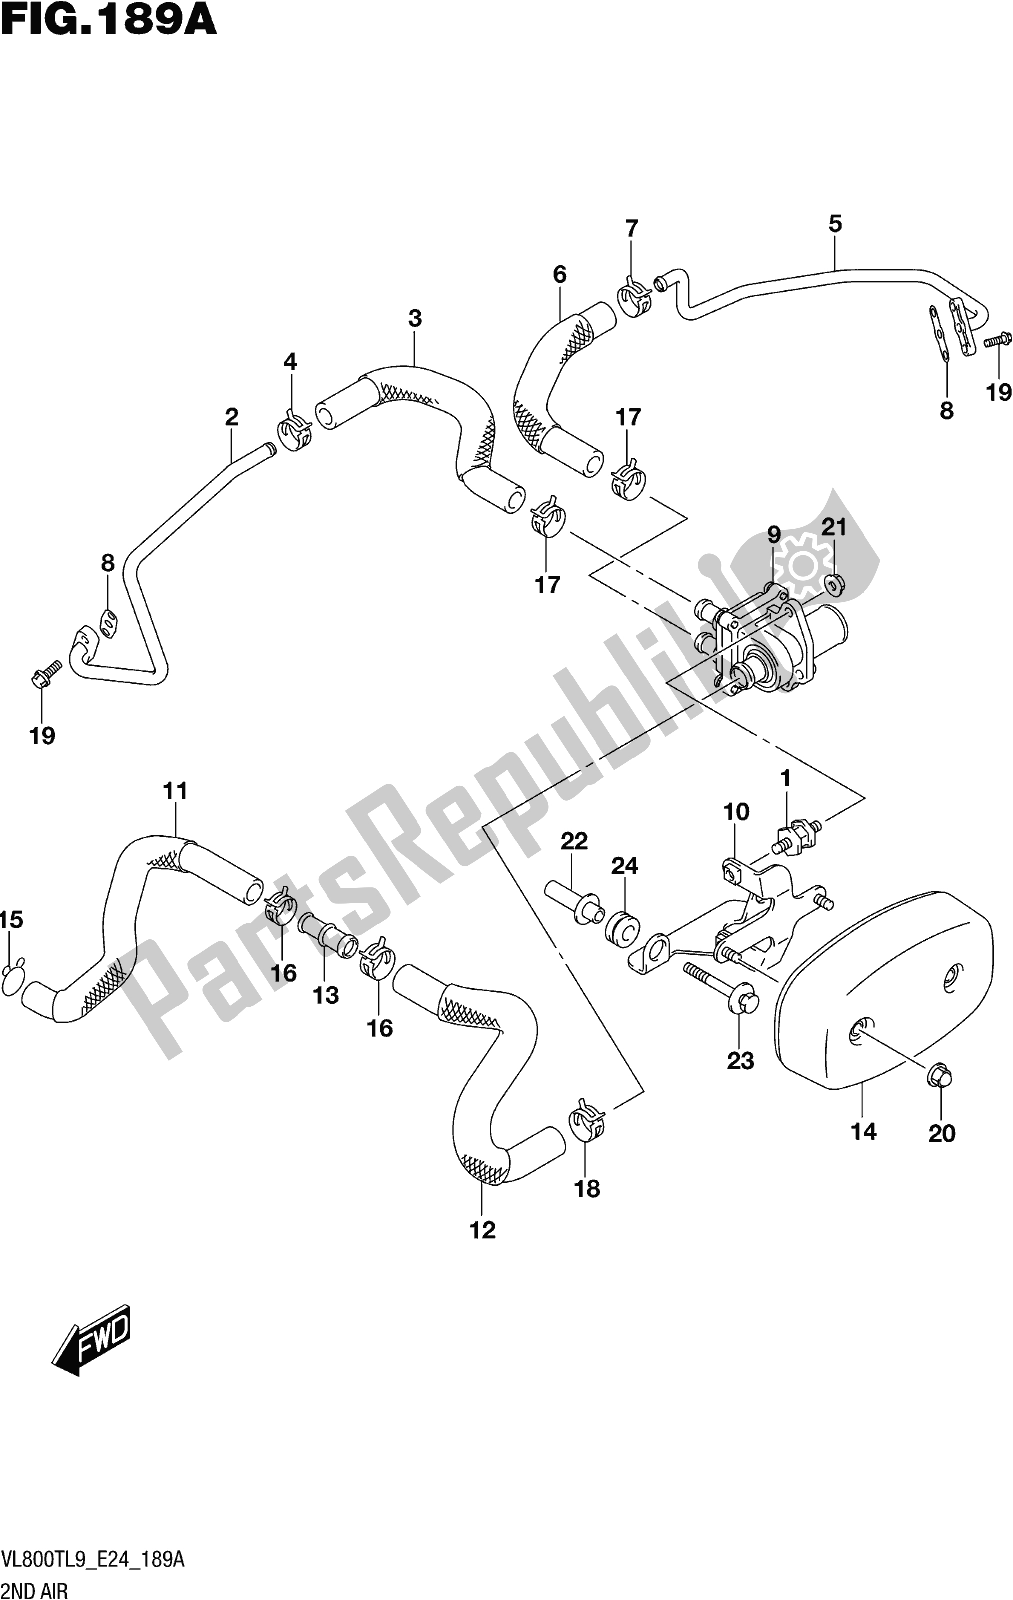 All parts for the Fig. 189a 2nd Air of the Suzuki VL 800T 2019